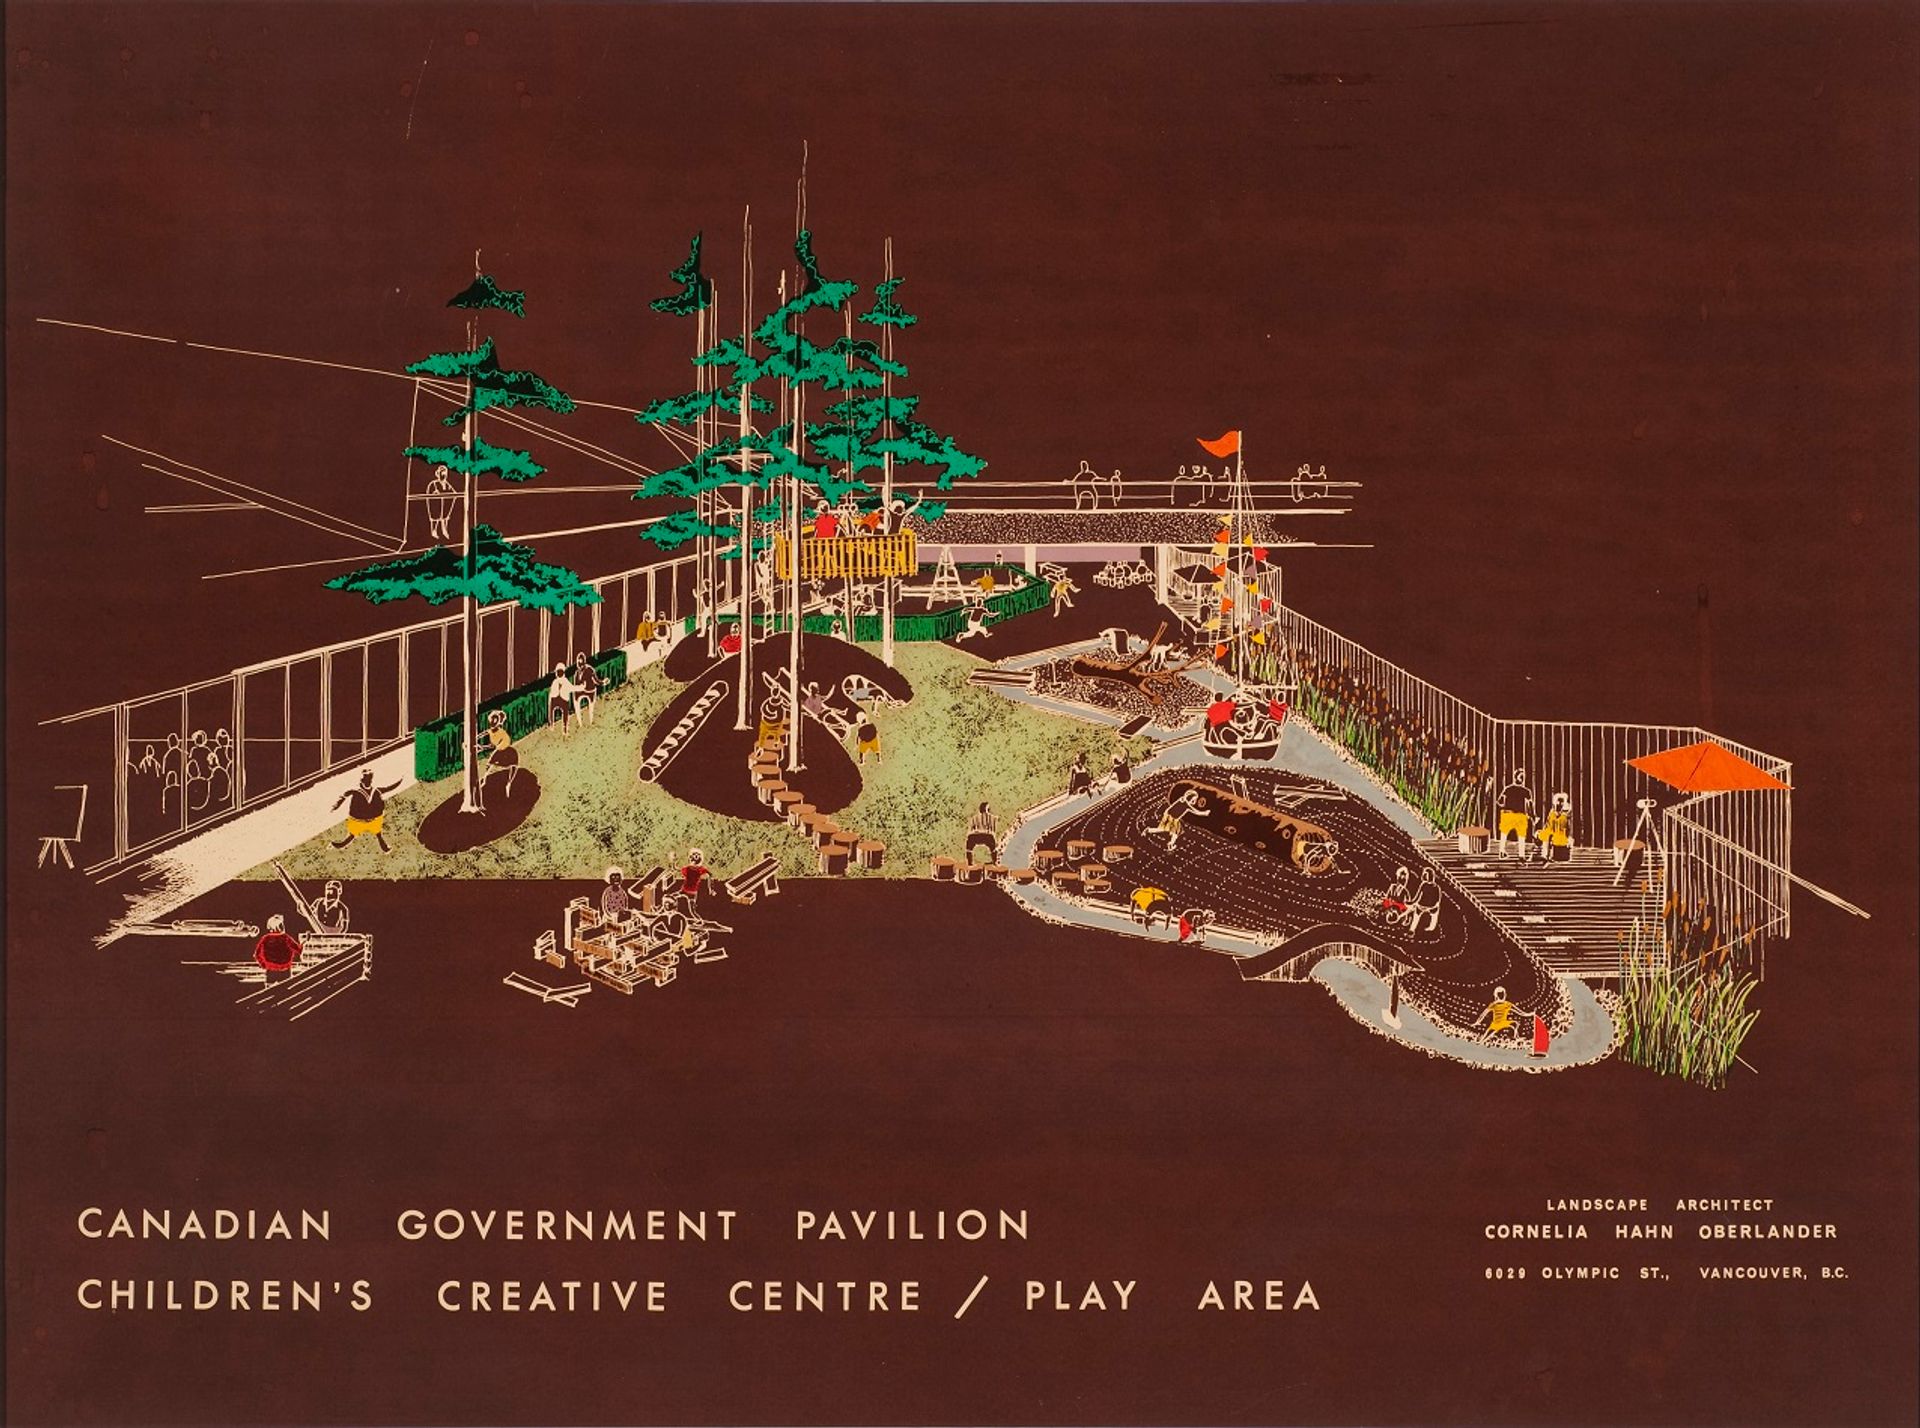 Cornelia Hahn Oberlander, Perspective view for Children's Creative Centre Playground, Canadian Federal Pavilion, Expo '67, Montréal, Québec (1967), dry transfer on negative photostat printed on cardboard Cornelia Hahn Oberlander fonds, Canadian Centre for Architecture. Gift of Cornelia Hahn Oberlander, © Cornelia Hahn Oberlander